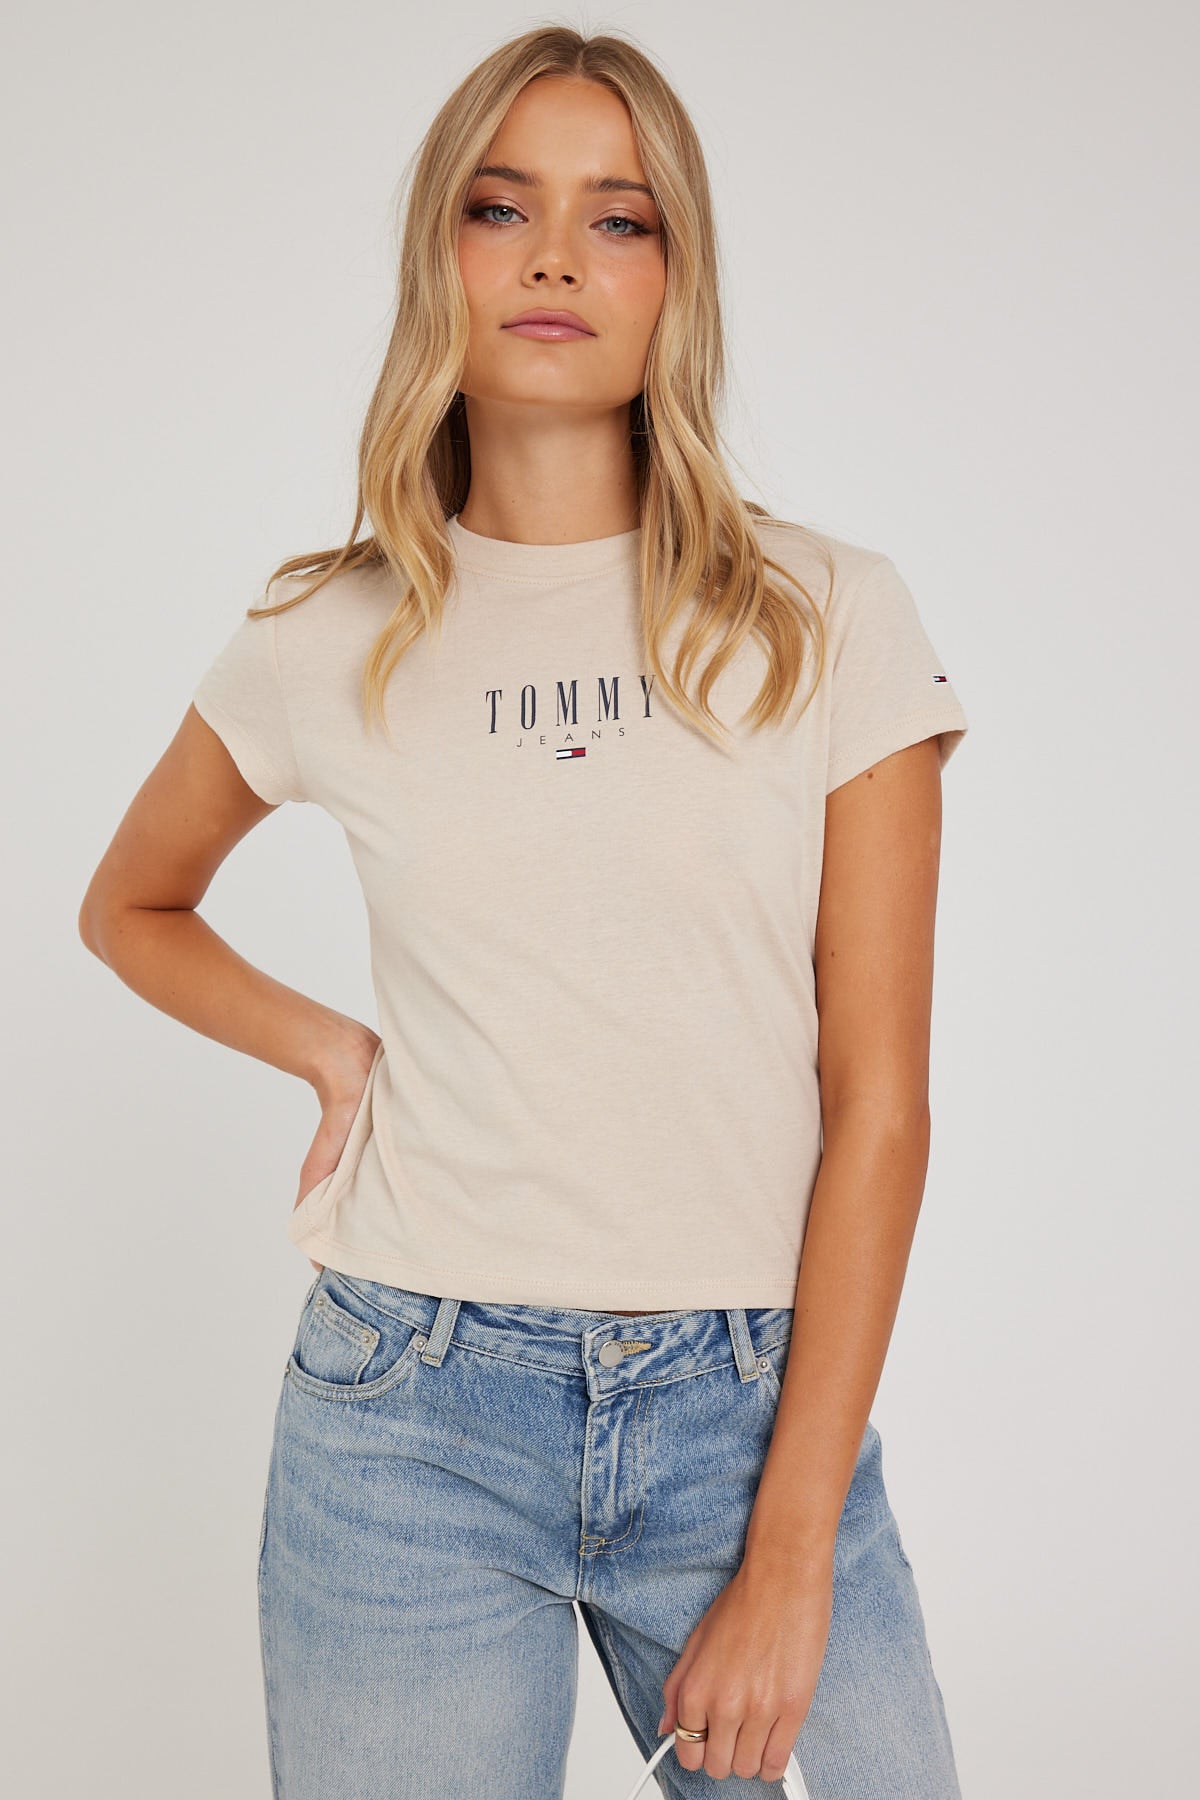 Tommy BEIGE CLASSIC – Store 2 Jeans Universal TEE ESSENTIAL LOGO BABY